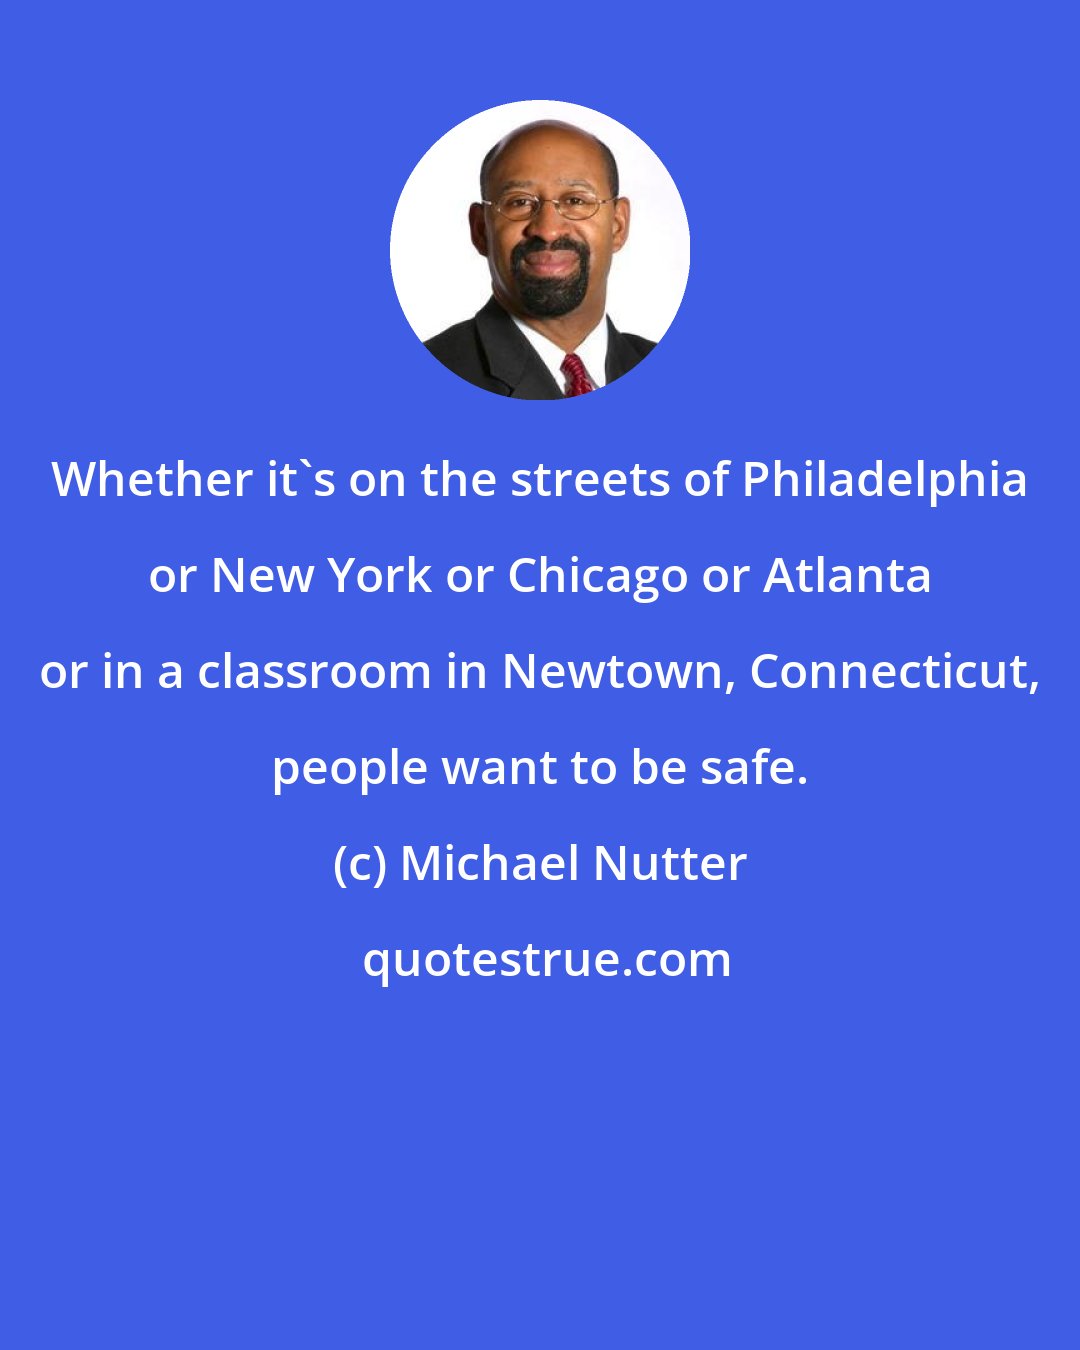 Michael Nutter: Whether it's on the streets of Philadelphia or New York or Chicago or Atlanta or in a classroom in Newtown, Connecticut, people want to be safe.